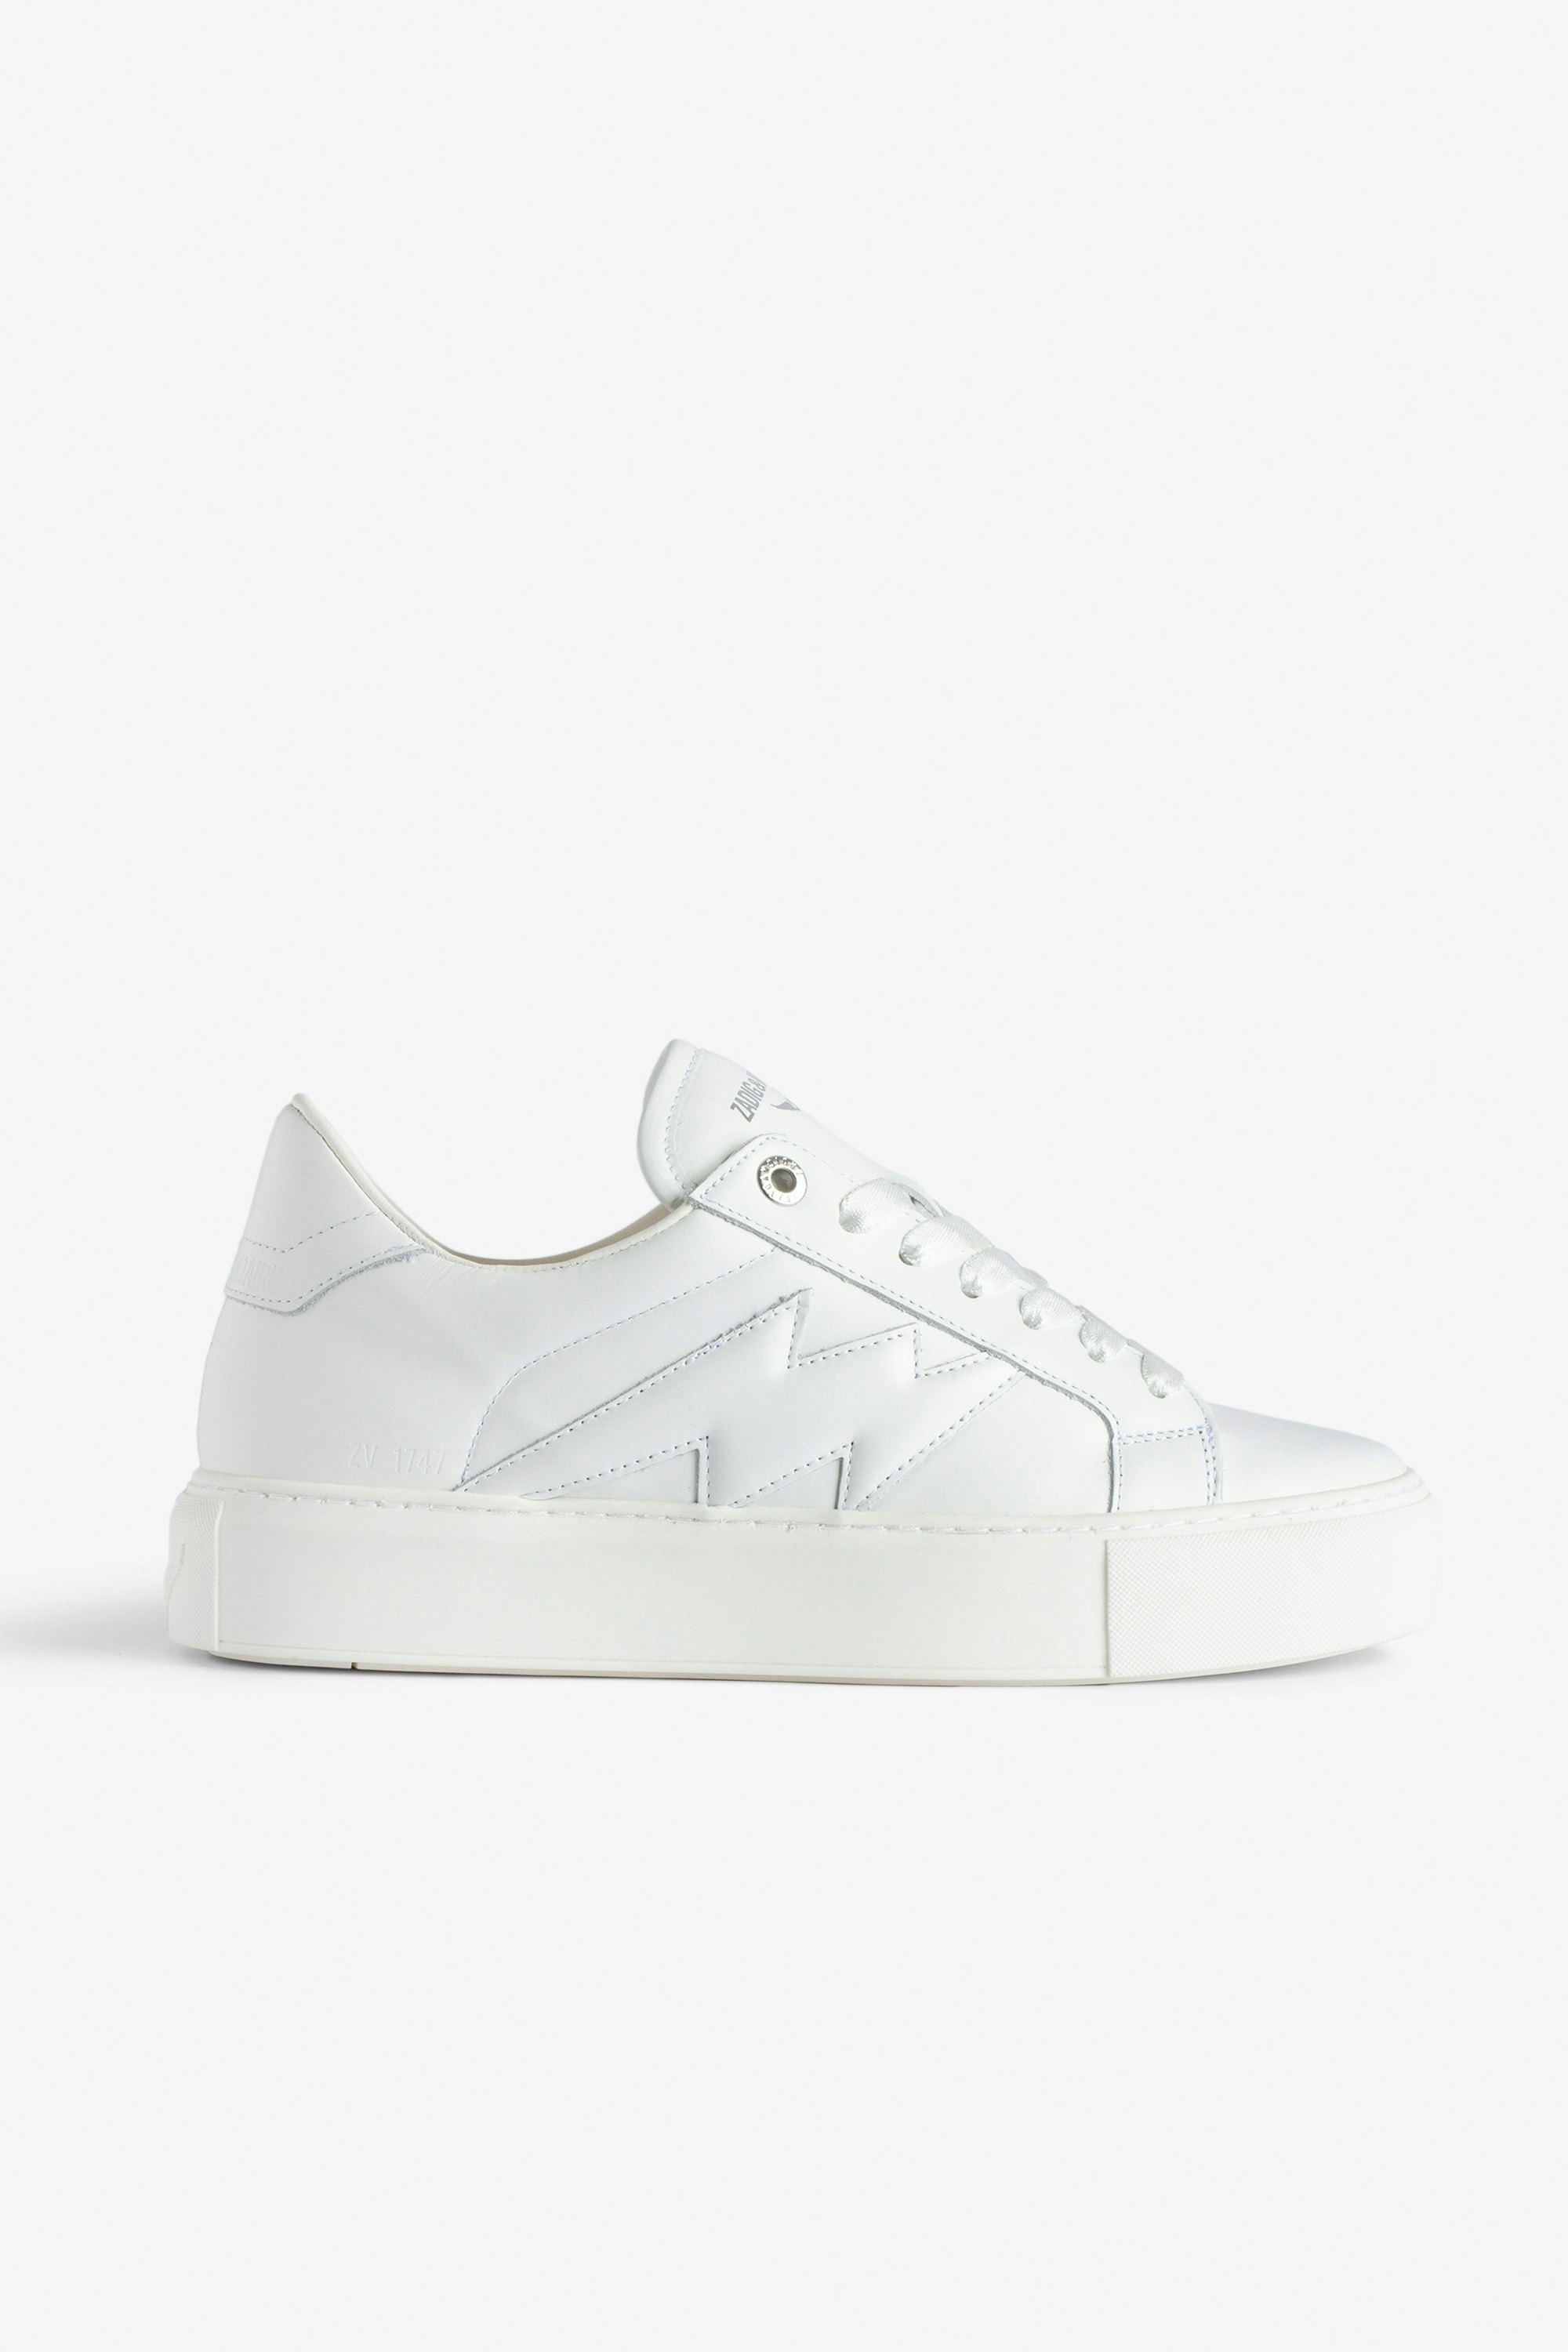 ZV1747 La Flash Low-Top Platform Trainers Women’s white smooth leather low-top trainers with lightning bolt panels and chunky sole.